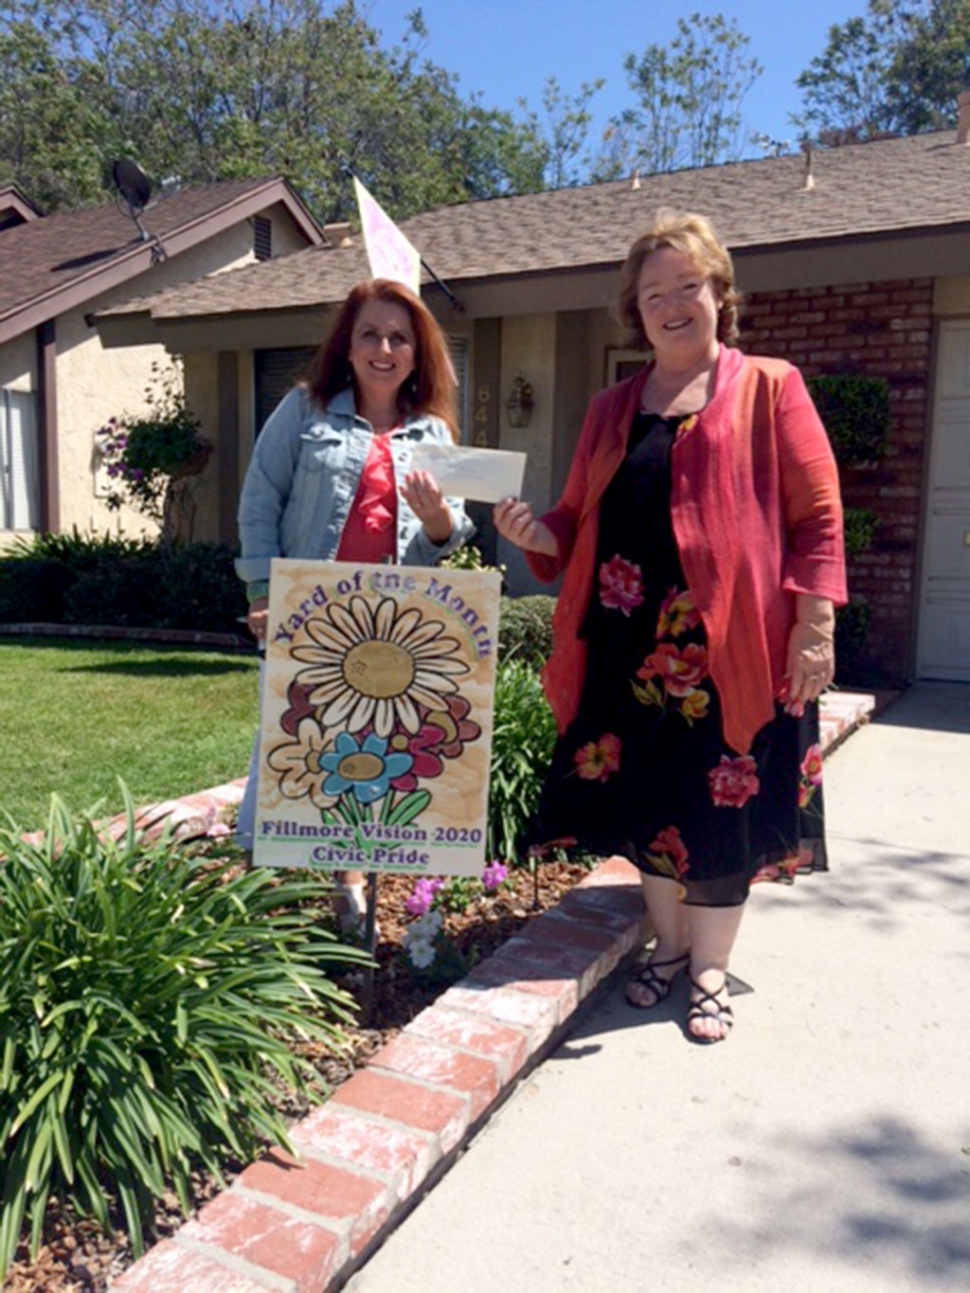 Theresa Robledo with Civic Pride Vision 2020 presents Yard of the Month to Ms. Joan Archer. Please drive by 644 Fernglen to view. Quoted by Ms. Archer: 